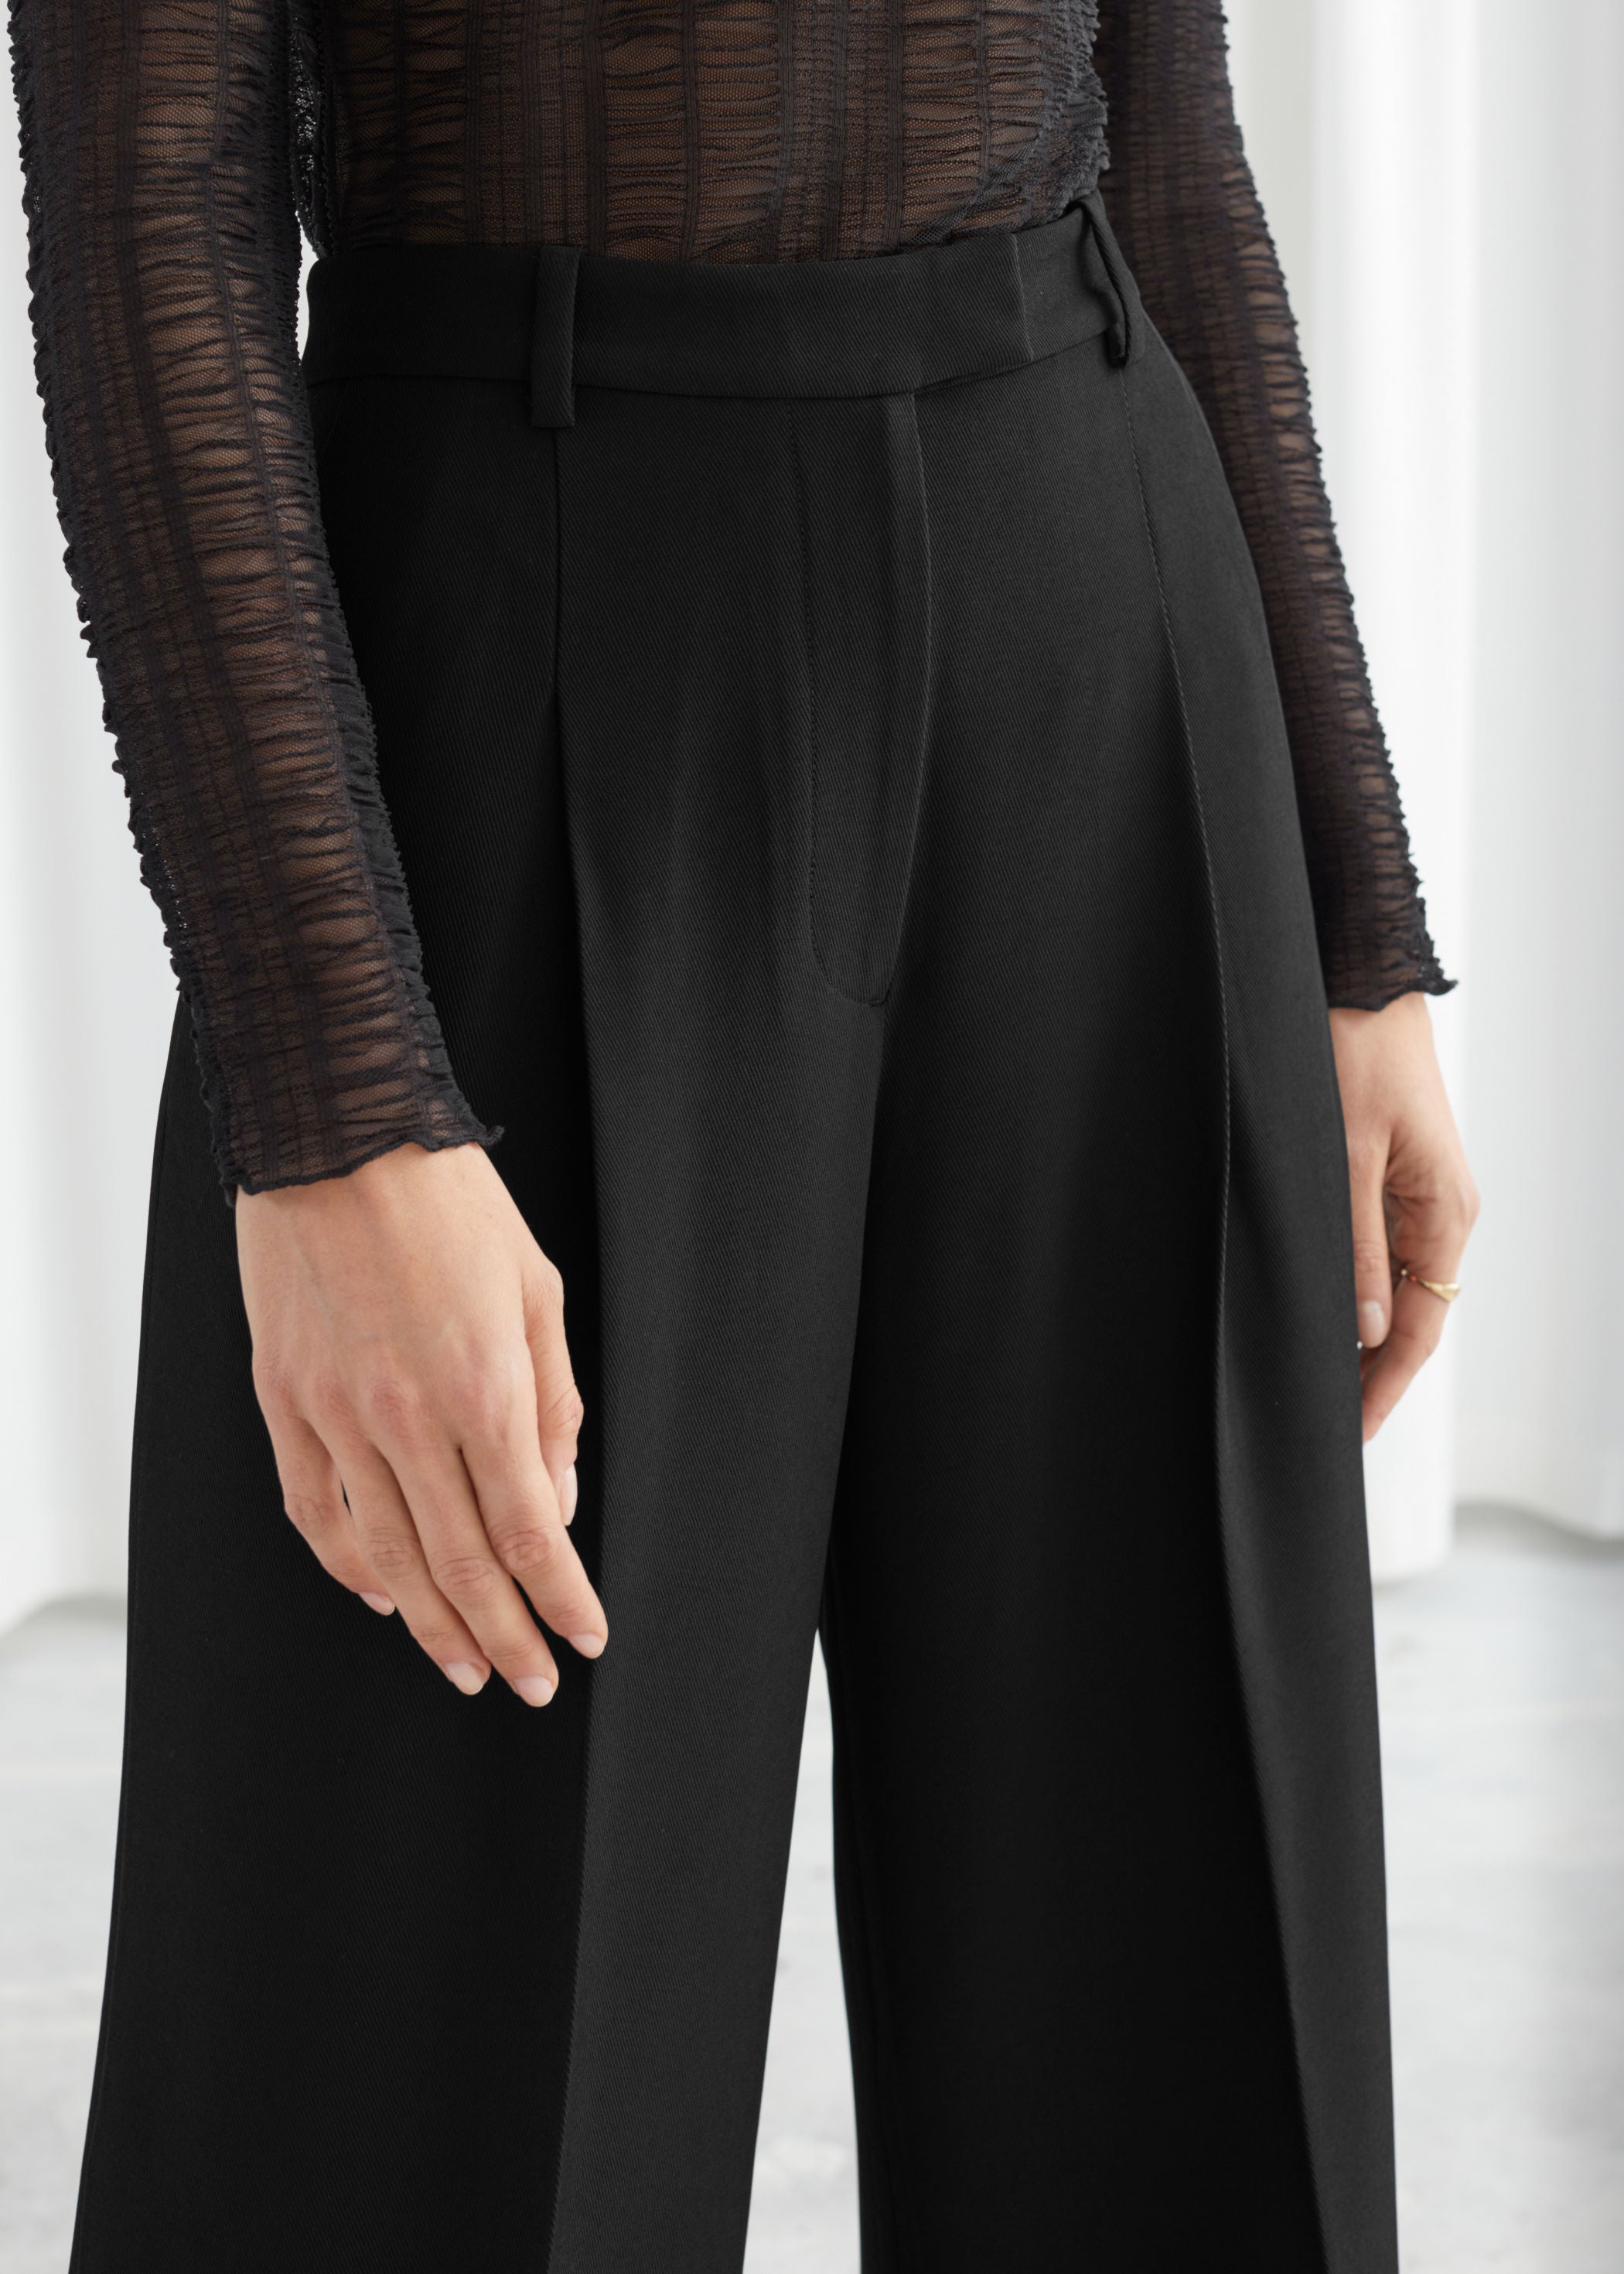 & Other Stories + Tailored Relaxed Trousers